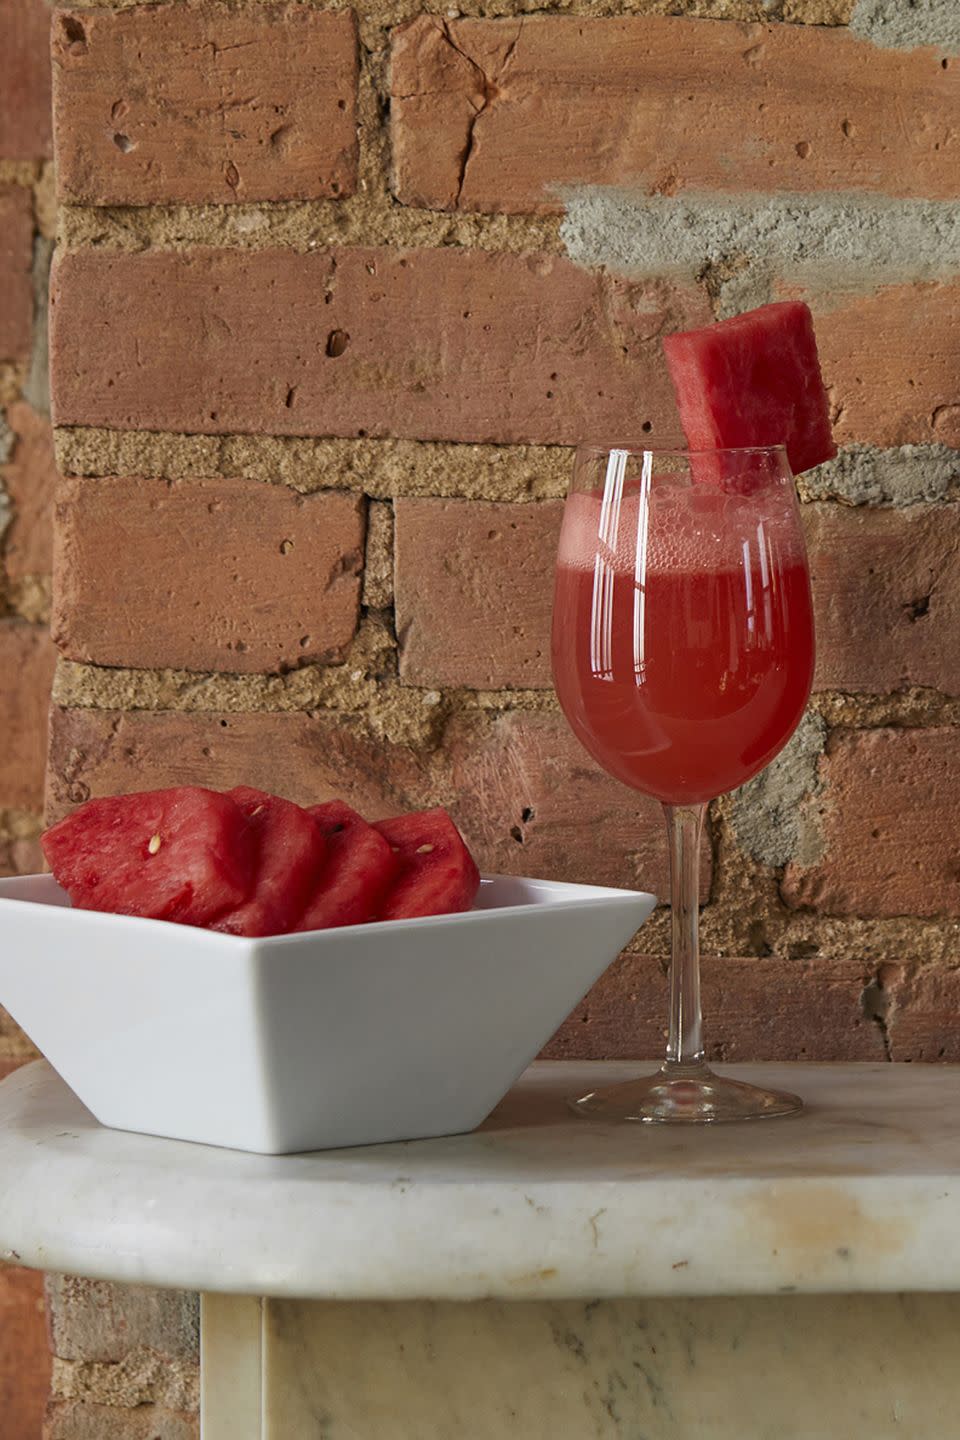 Red, Wall, Drink, Food, Daiquiri, Brick, Room, Fruit, Glass, Still life photography, 